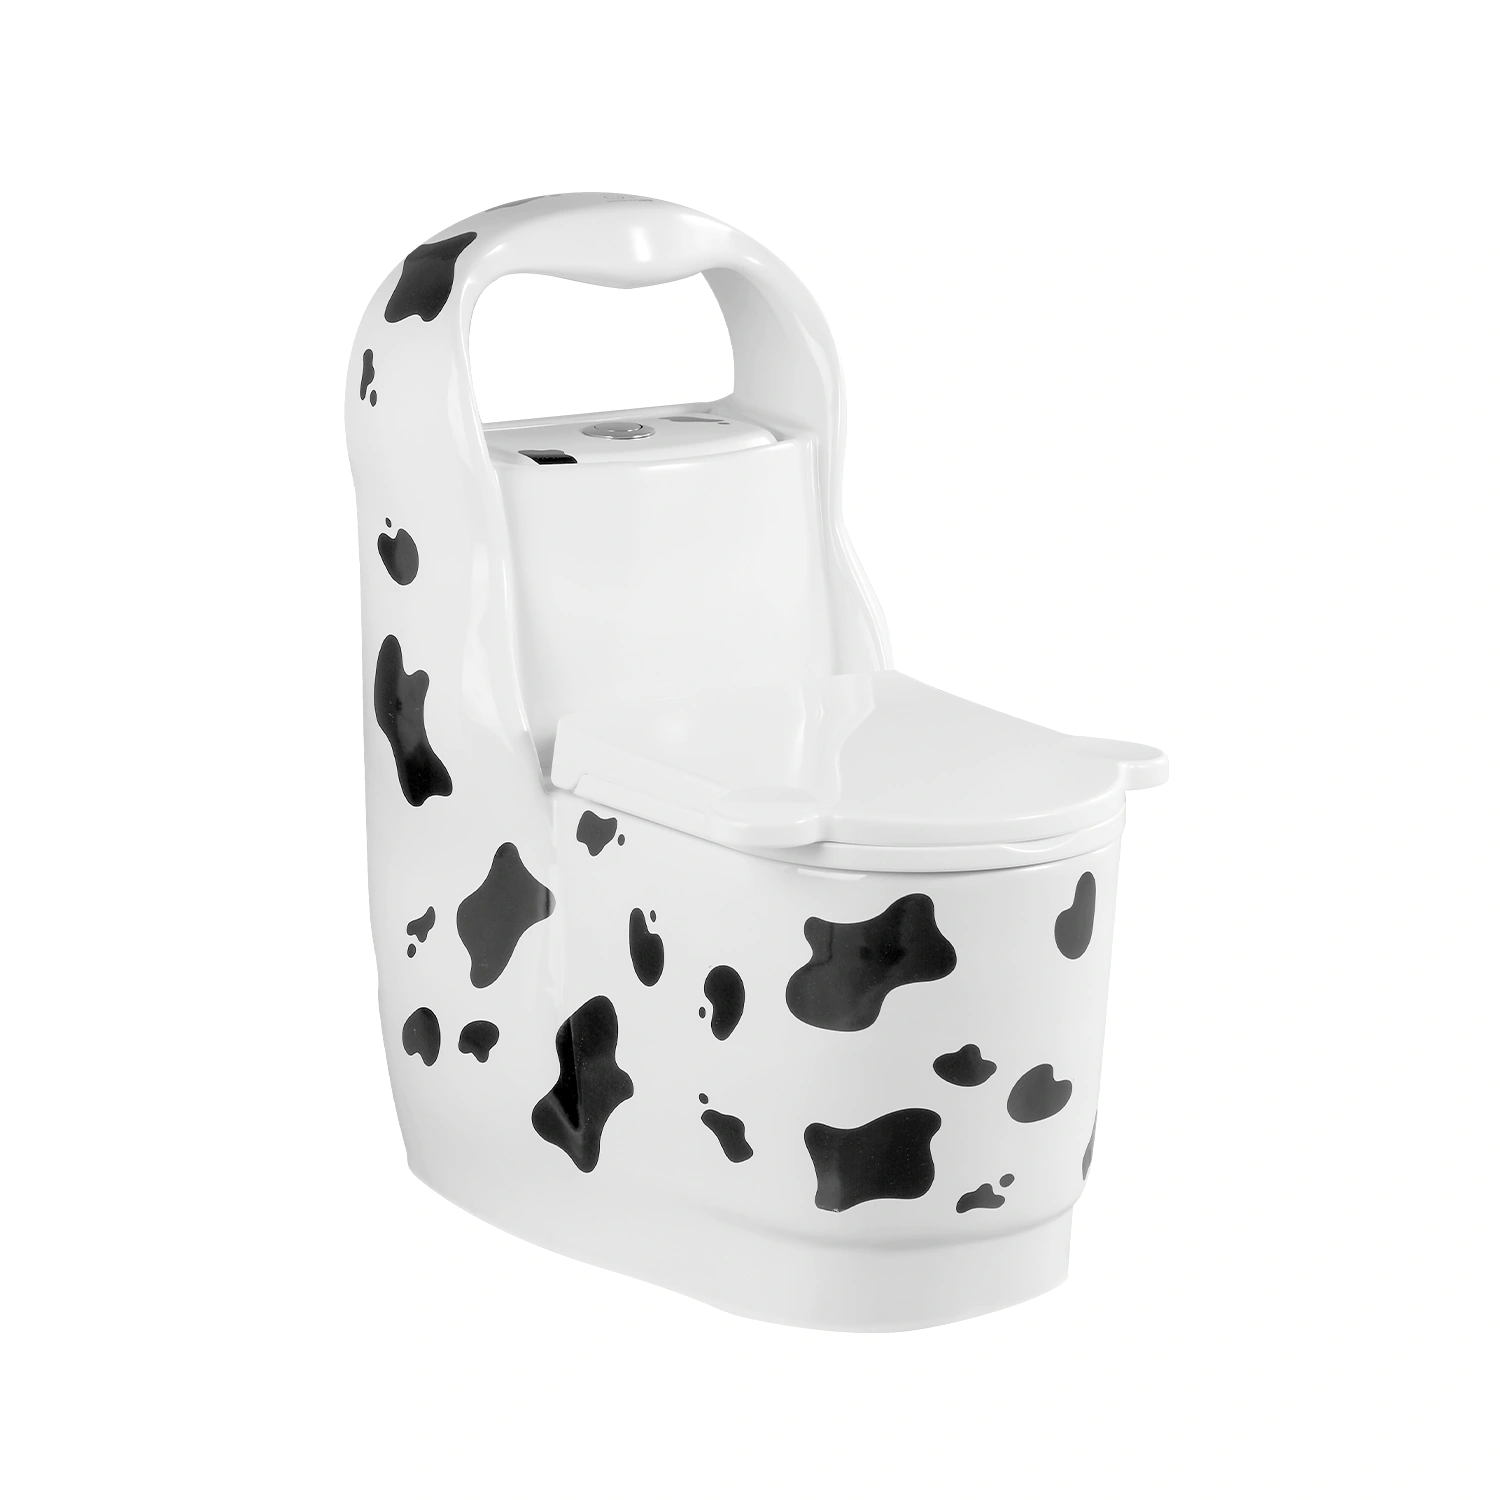 cute cow children toilet in black and white color WA-9000-C, kids one-piece toilet made by meilong ceramics company